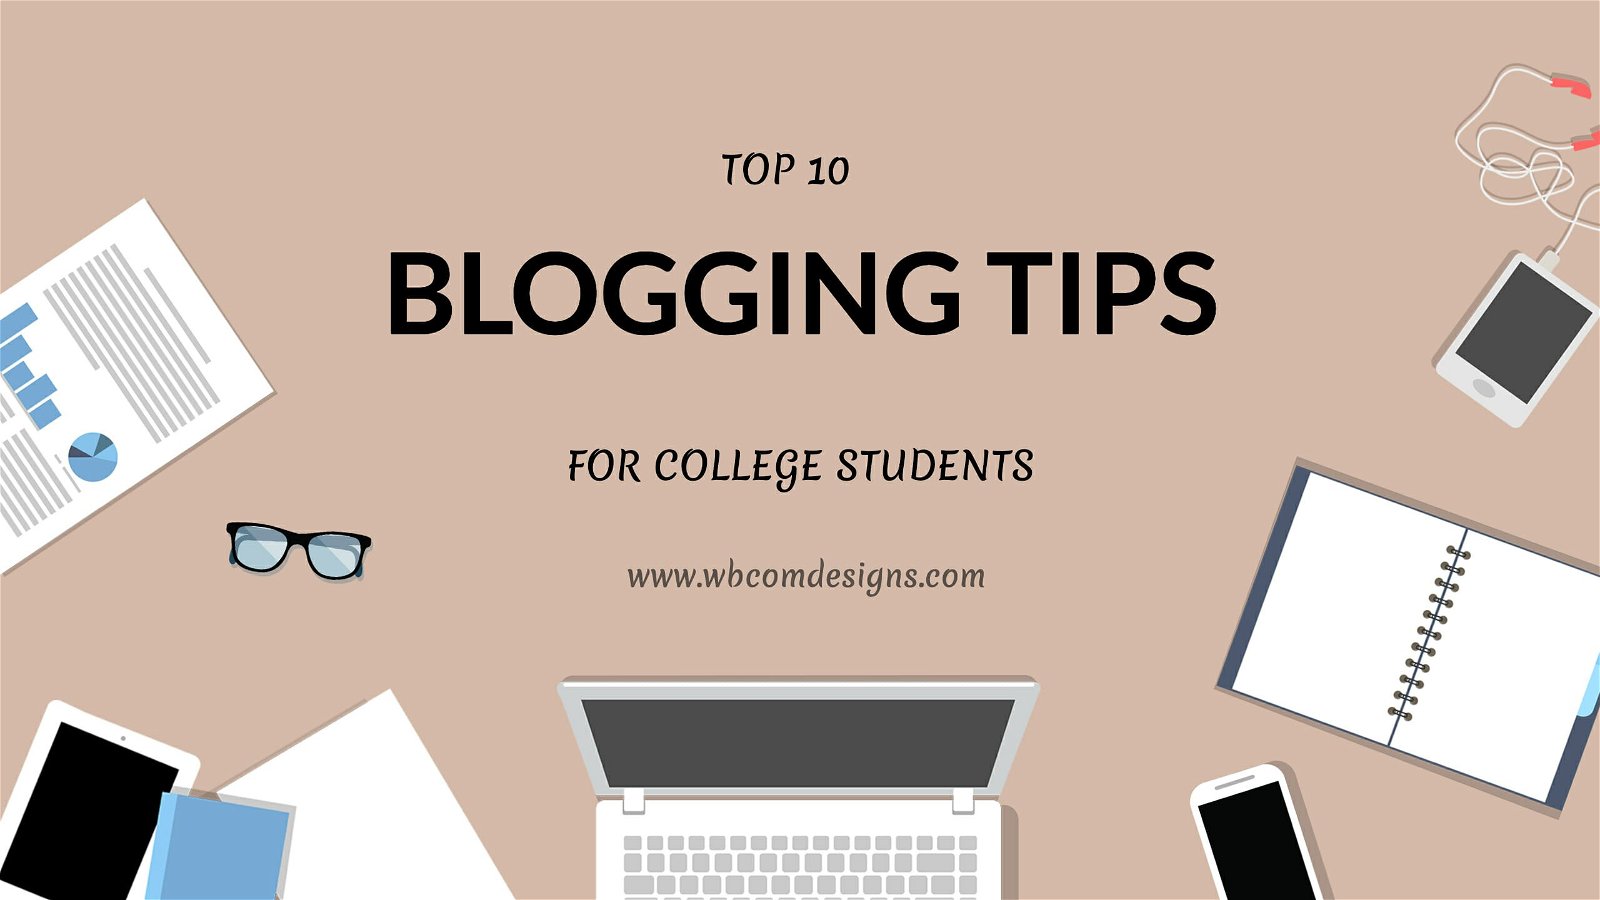 BLOGGING TIPS FOR COLLEGE STUDENTS